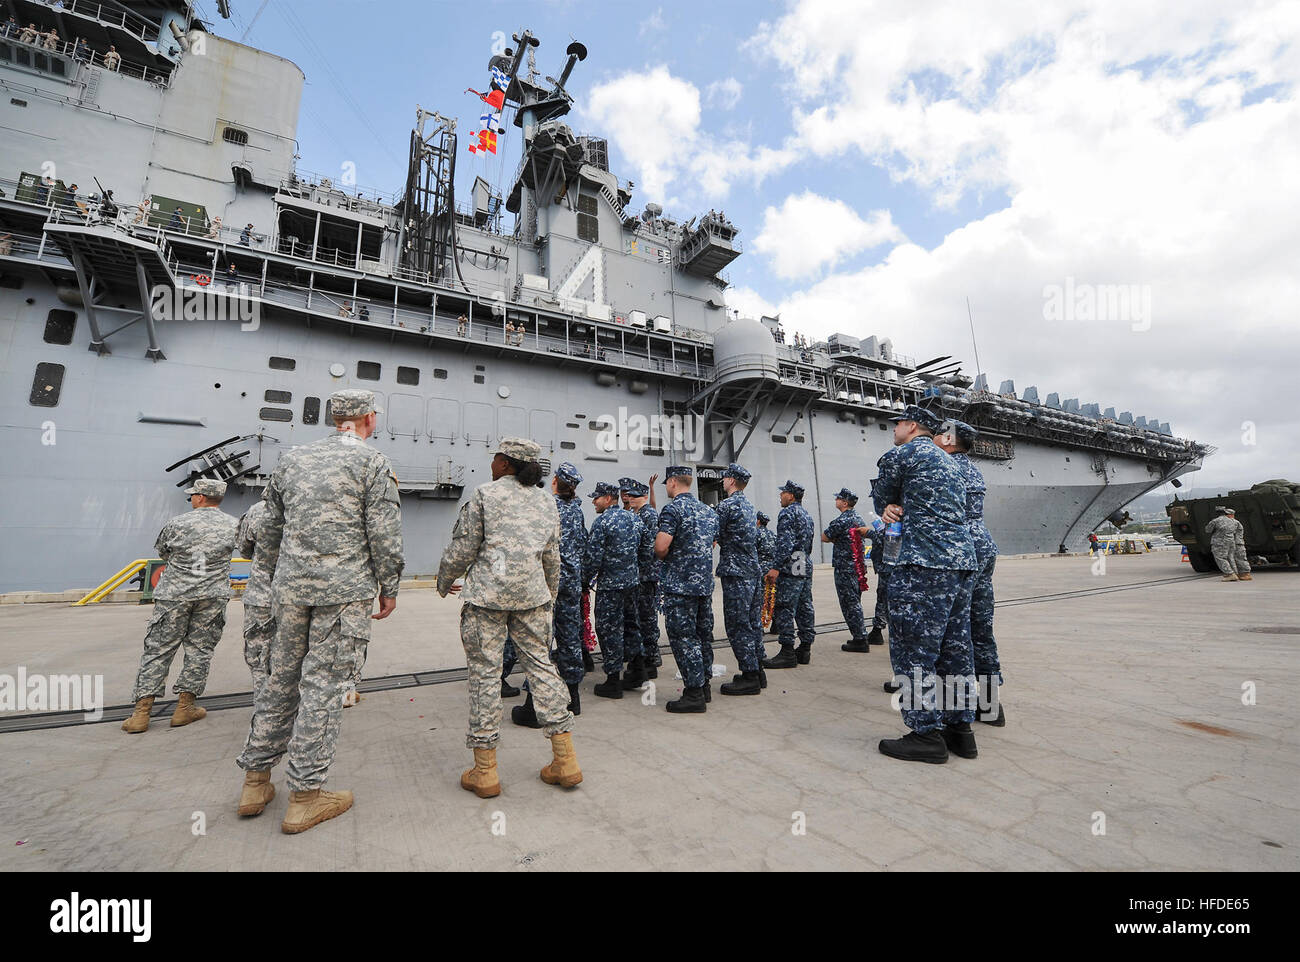 U.S. Service members greet the amphibious assault ship USS Boxer (LHD 4) as the ship arrives at Joint Base Pearl Harbor-Hickam, Hawaii, April 15, 2014. The Boxer conducted a deployment in the U.S. 5th Fleet and 7th Fleet areas of responsibility and participated in Ssang Yong 14 during Marine Expeditionary Force Exercise (MEFEX) 2014. MEFEX 2014 was a U.S. Marine Corps Forces Pacific-sponsored series of exercises between the U.S. Navy and Marine Corps and South Korean forces. Among the exercises were the Korean Marine Exchange Program, Freedom Banner 14, Ssang Yong 14, Key Resolve 14 and the Co Stock Photo